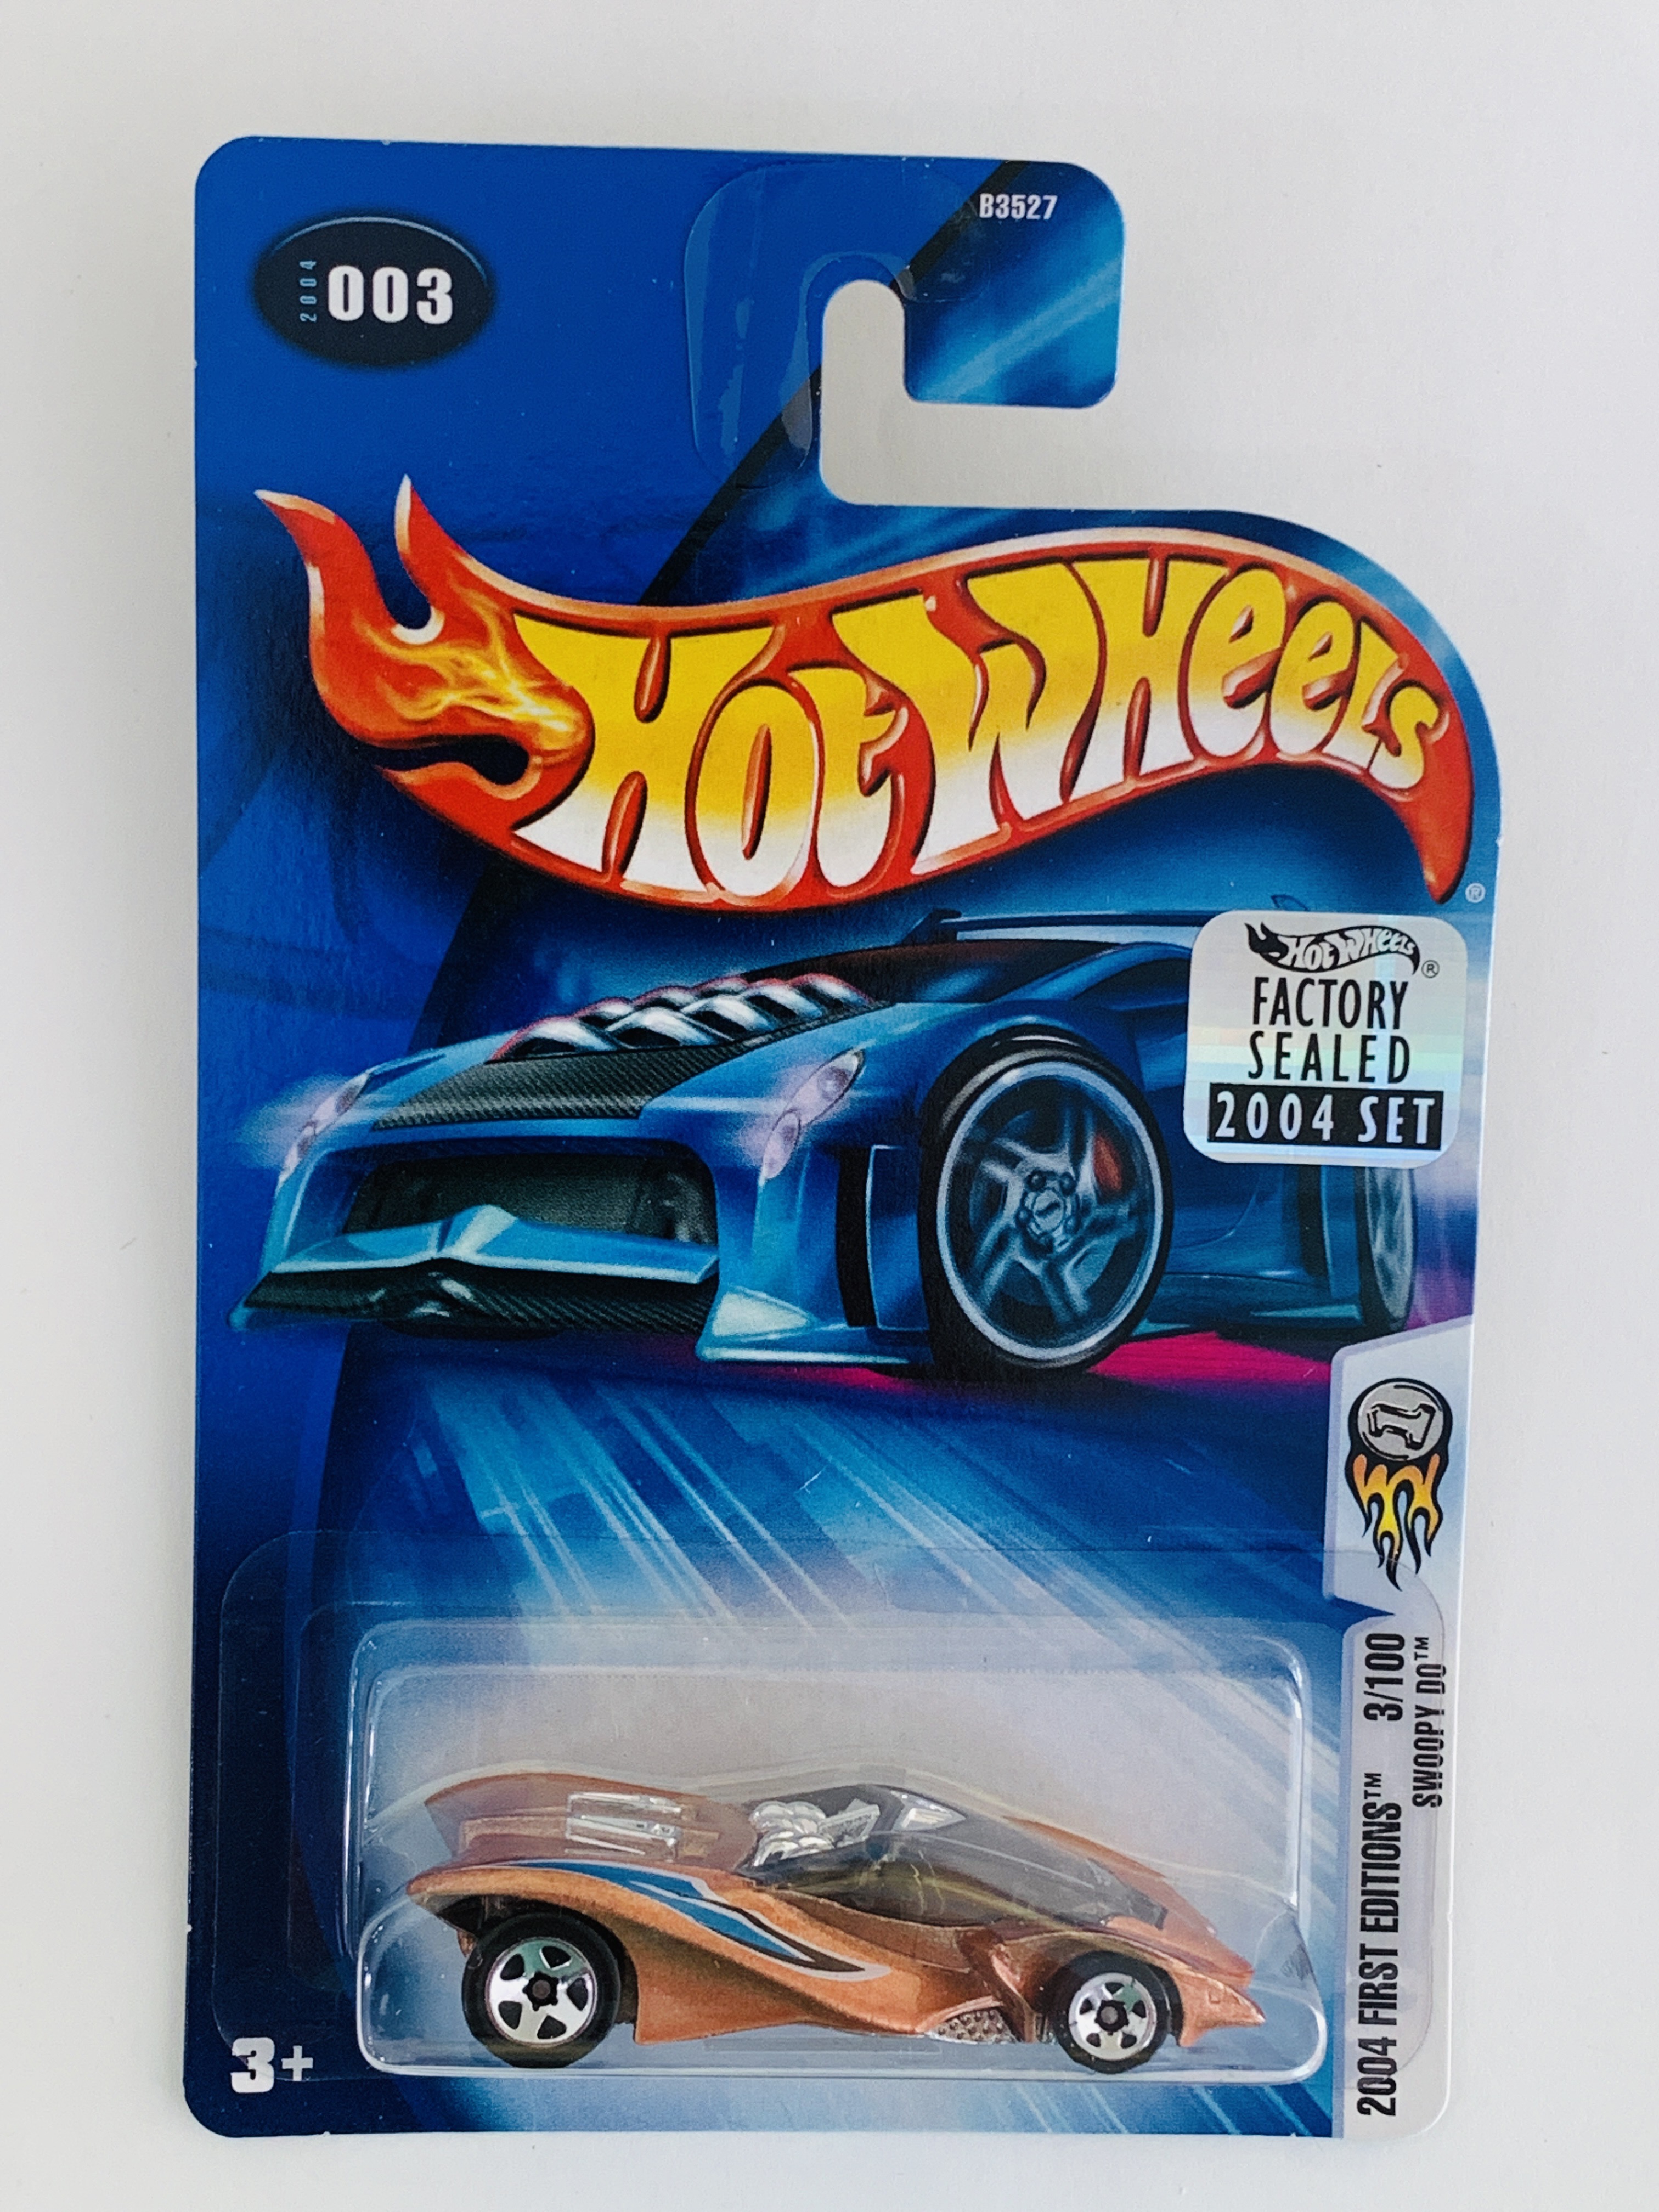 Hot Wheels 2004 Factory Set #003 Swoopy Do